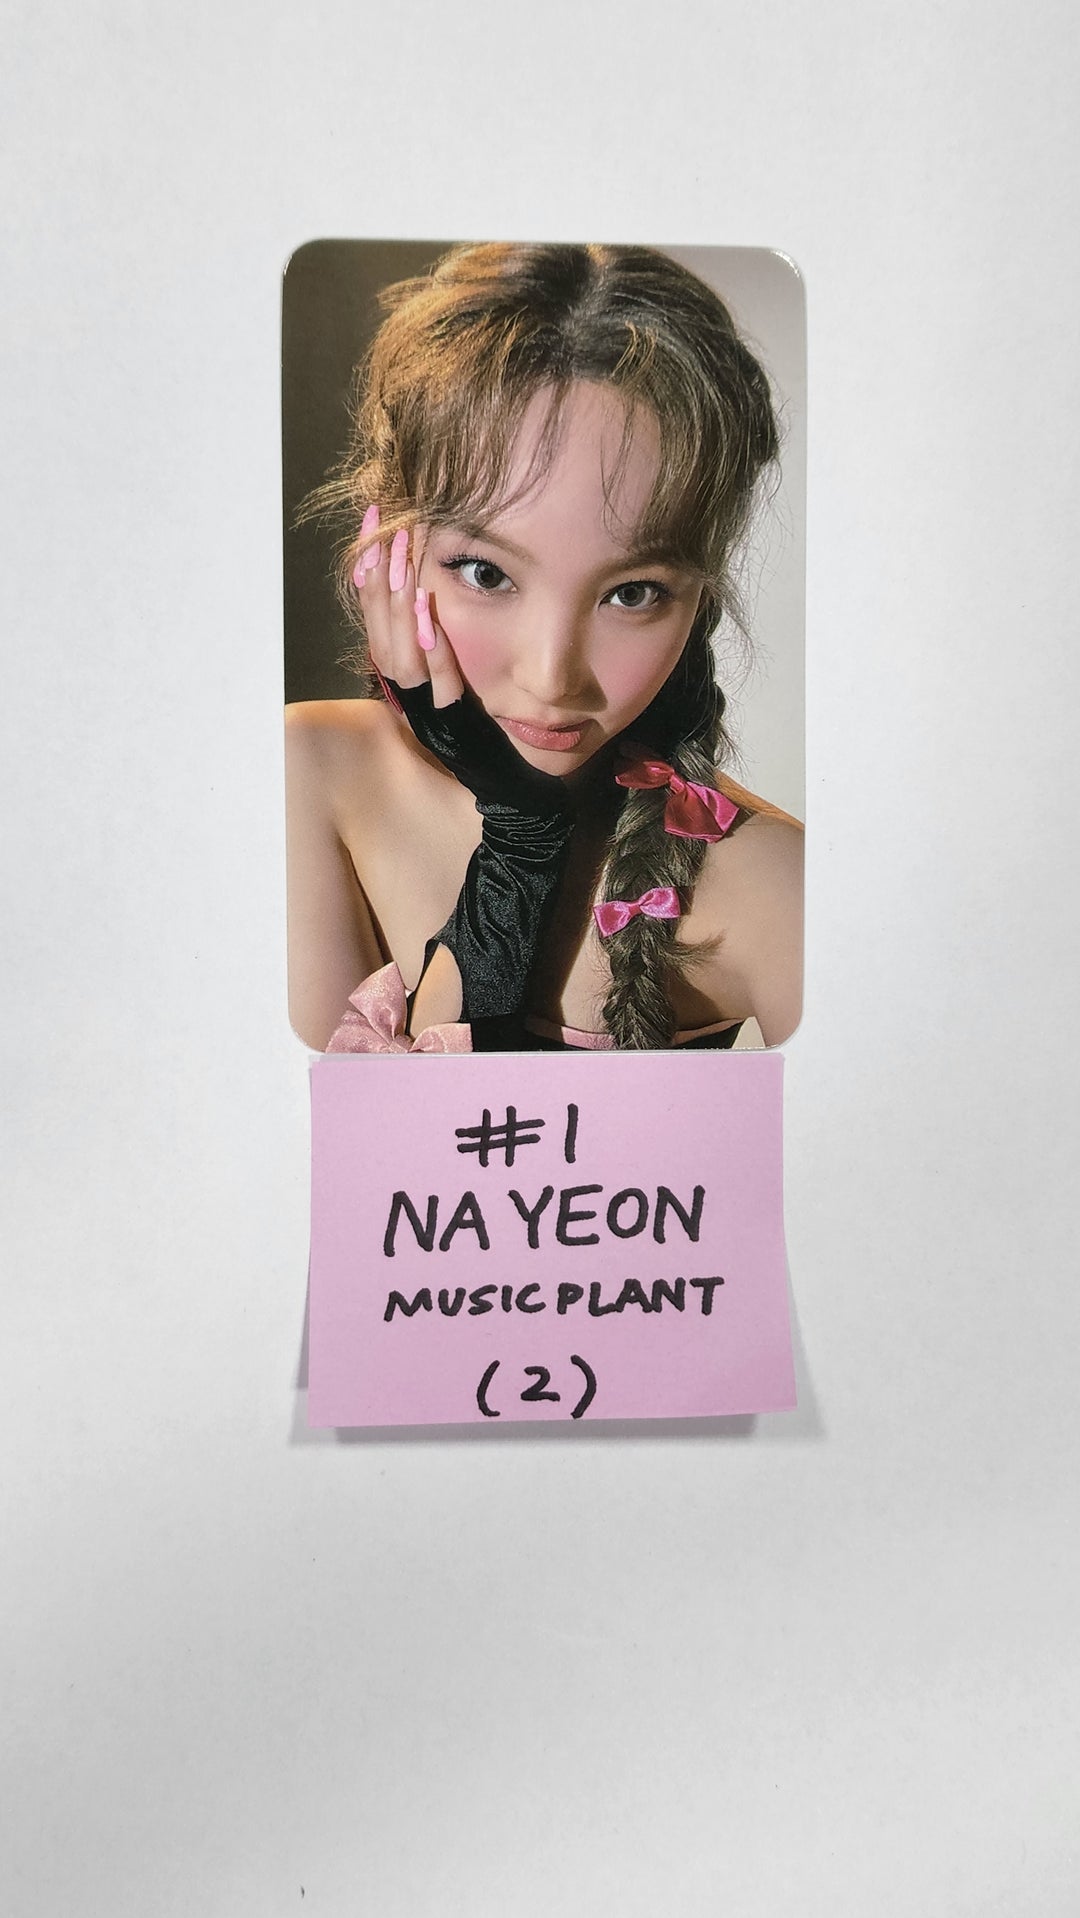 Good evening! Can anyone help me id/where to buy this Nayeon Pop